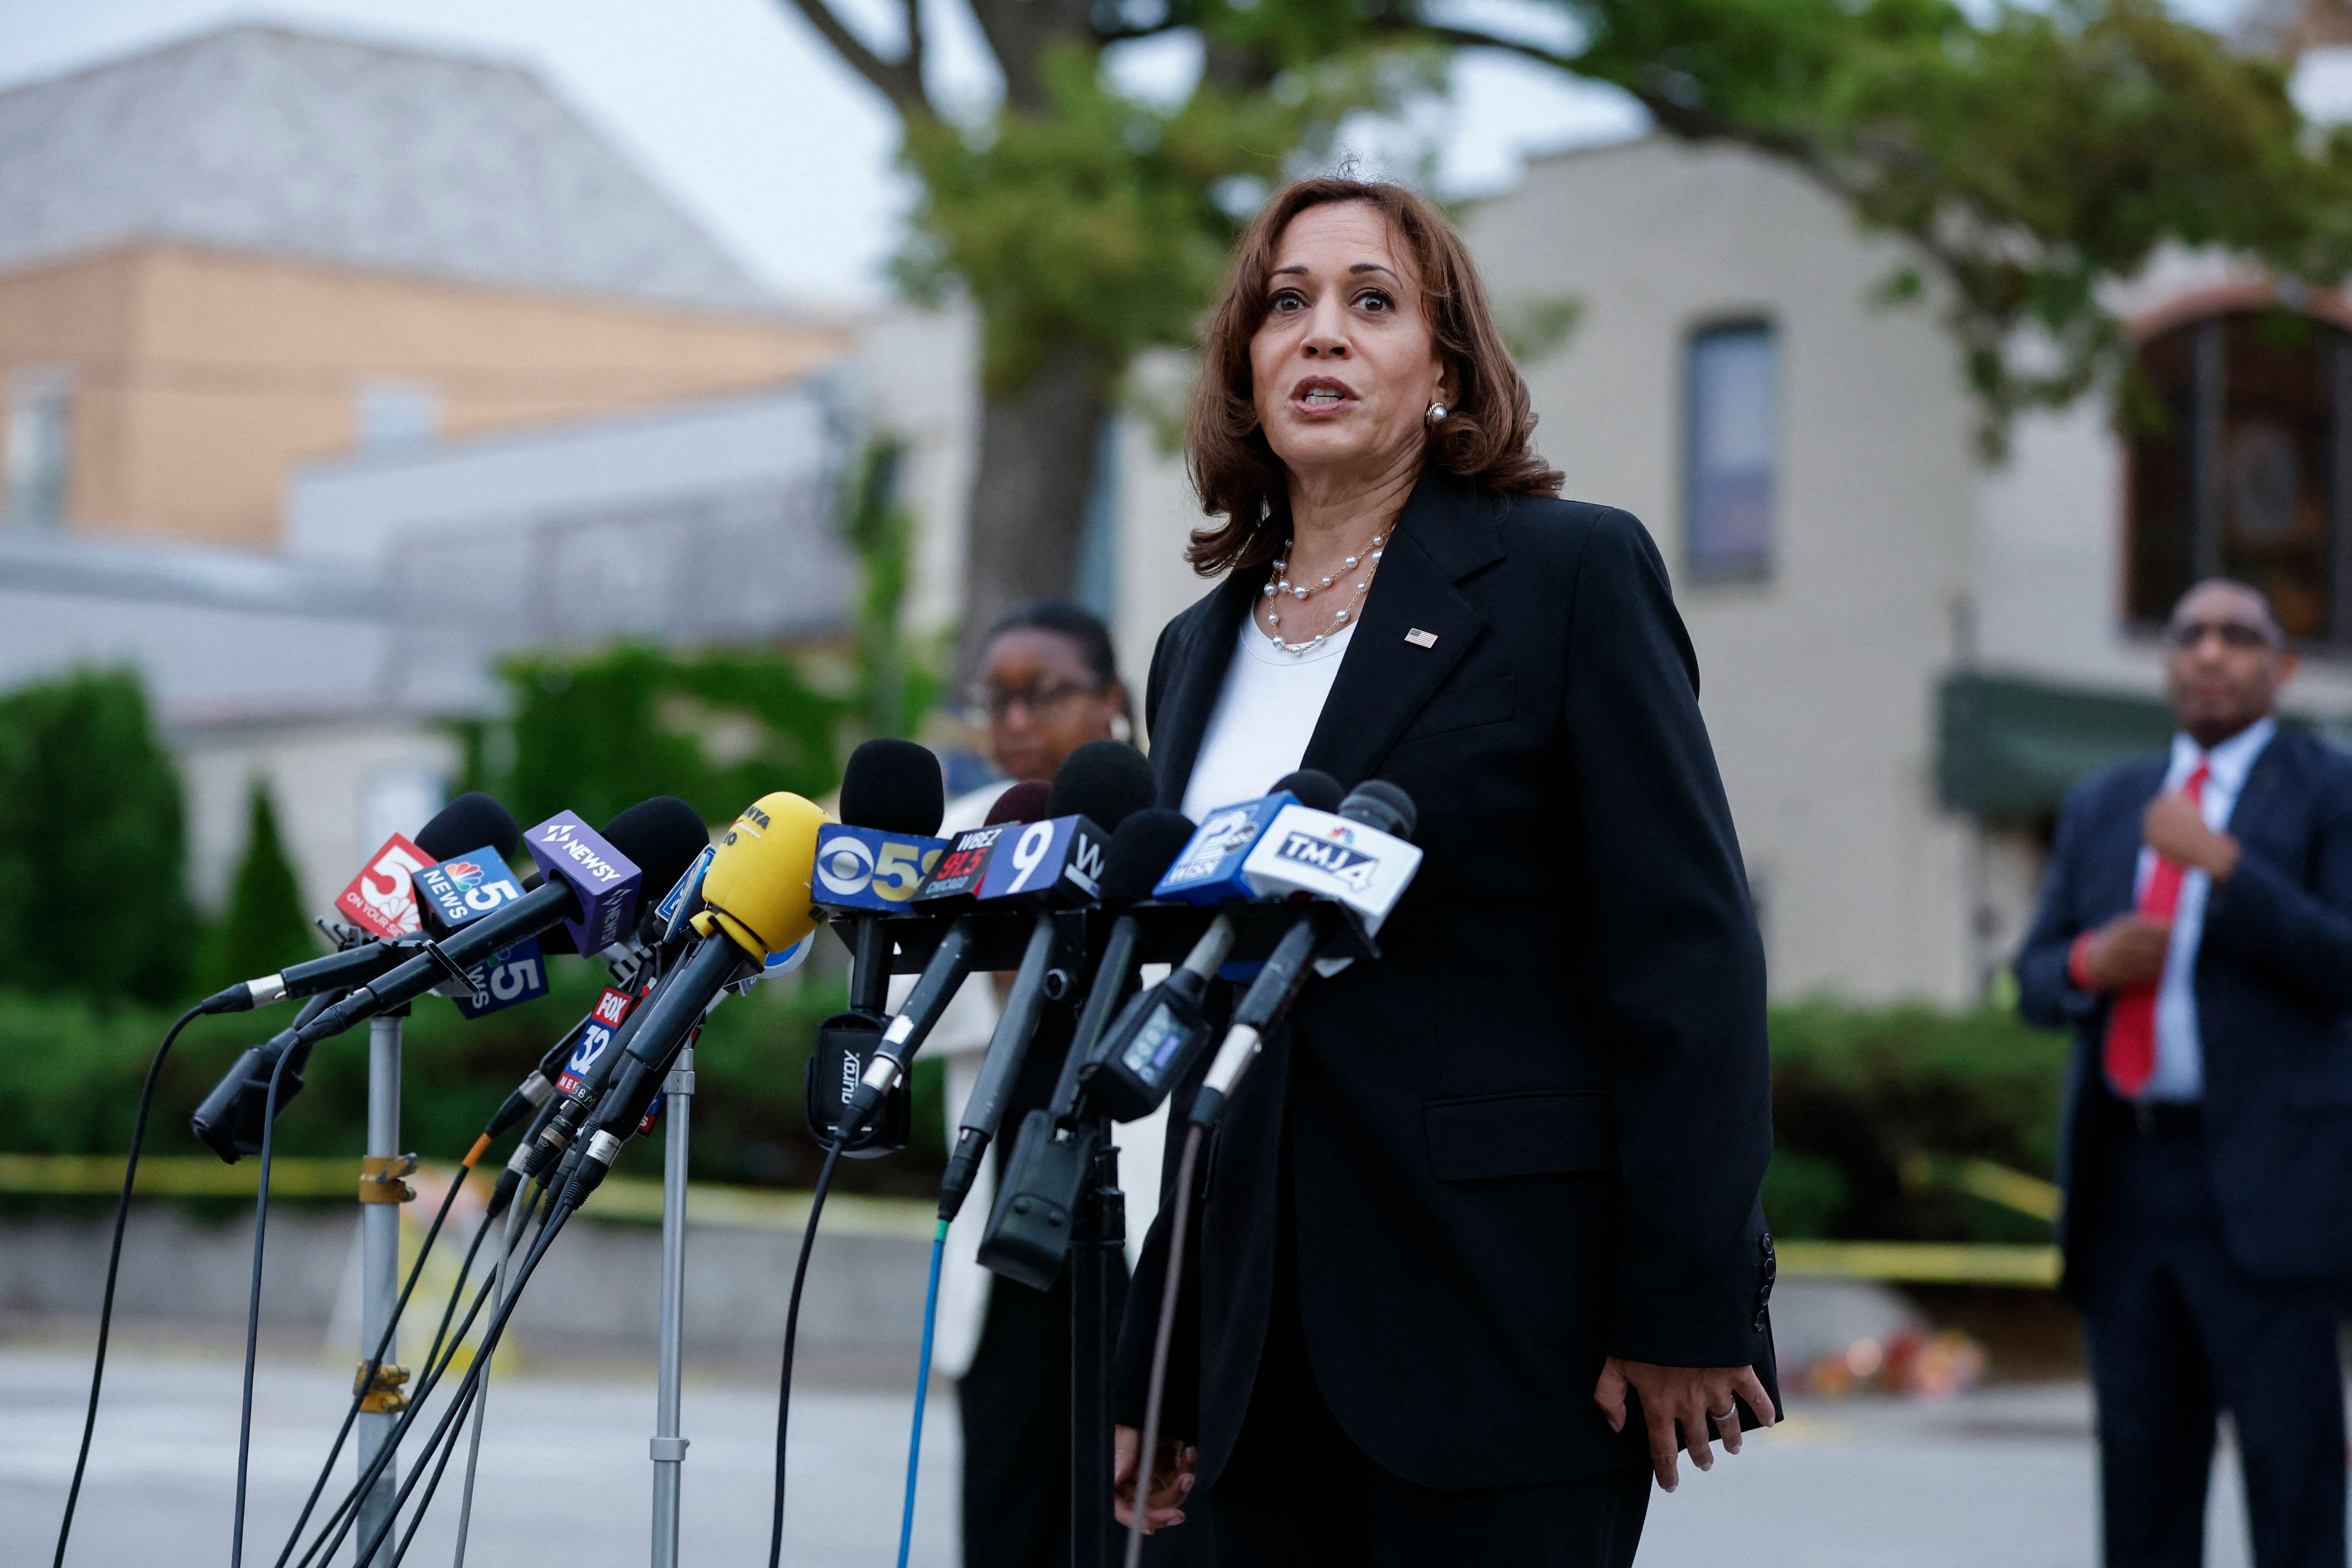 Highland Park shooting: Kamala Harris goes viral with 'seriously' word salad during visit to Chicago suburb